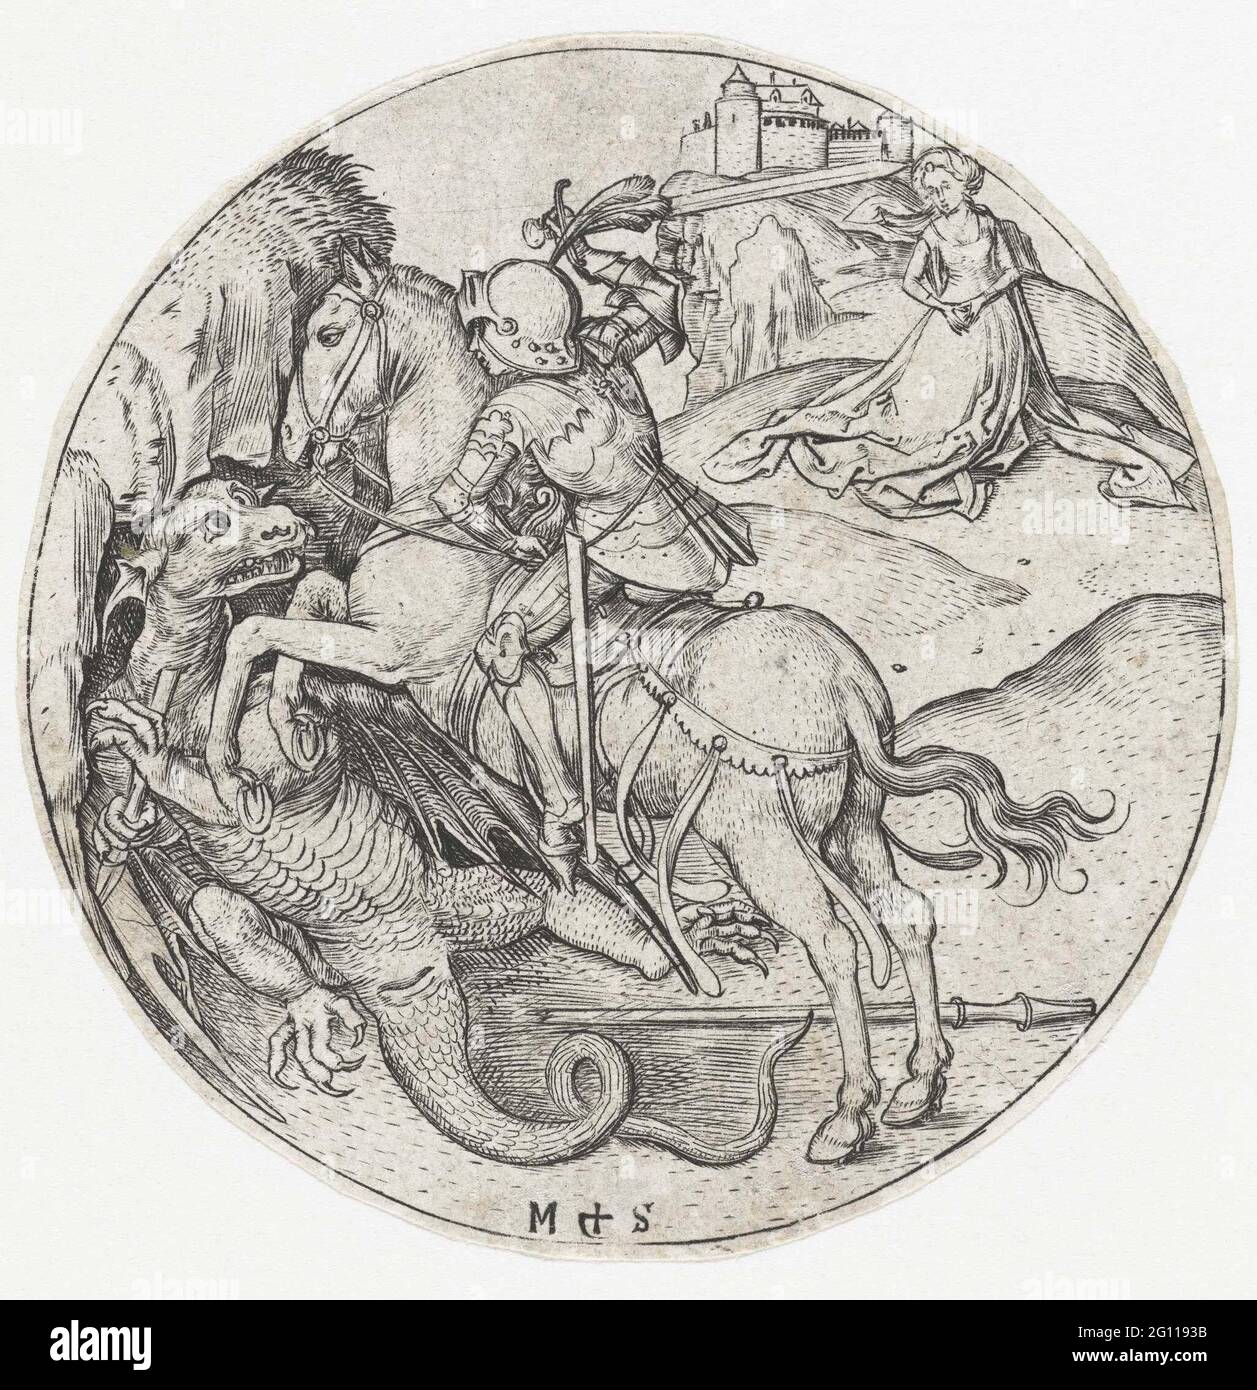 Saint George Slaying the Dragon. Like many other renowned printmakers, Schongauer learned to draw and engrave in a goldsmith’s workshop. This print is also conceivable as executed in precious metal, for example as the decoration of the well of a plate. Schongauer here depicts the moment when George raises his sword to give the death blow to the monster. Its eyes wide open, the dragon awaits its fate. Stock Photo